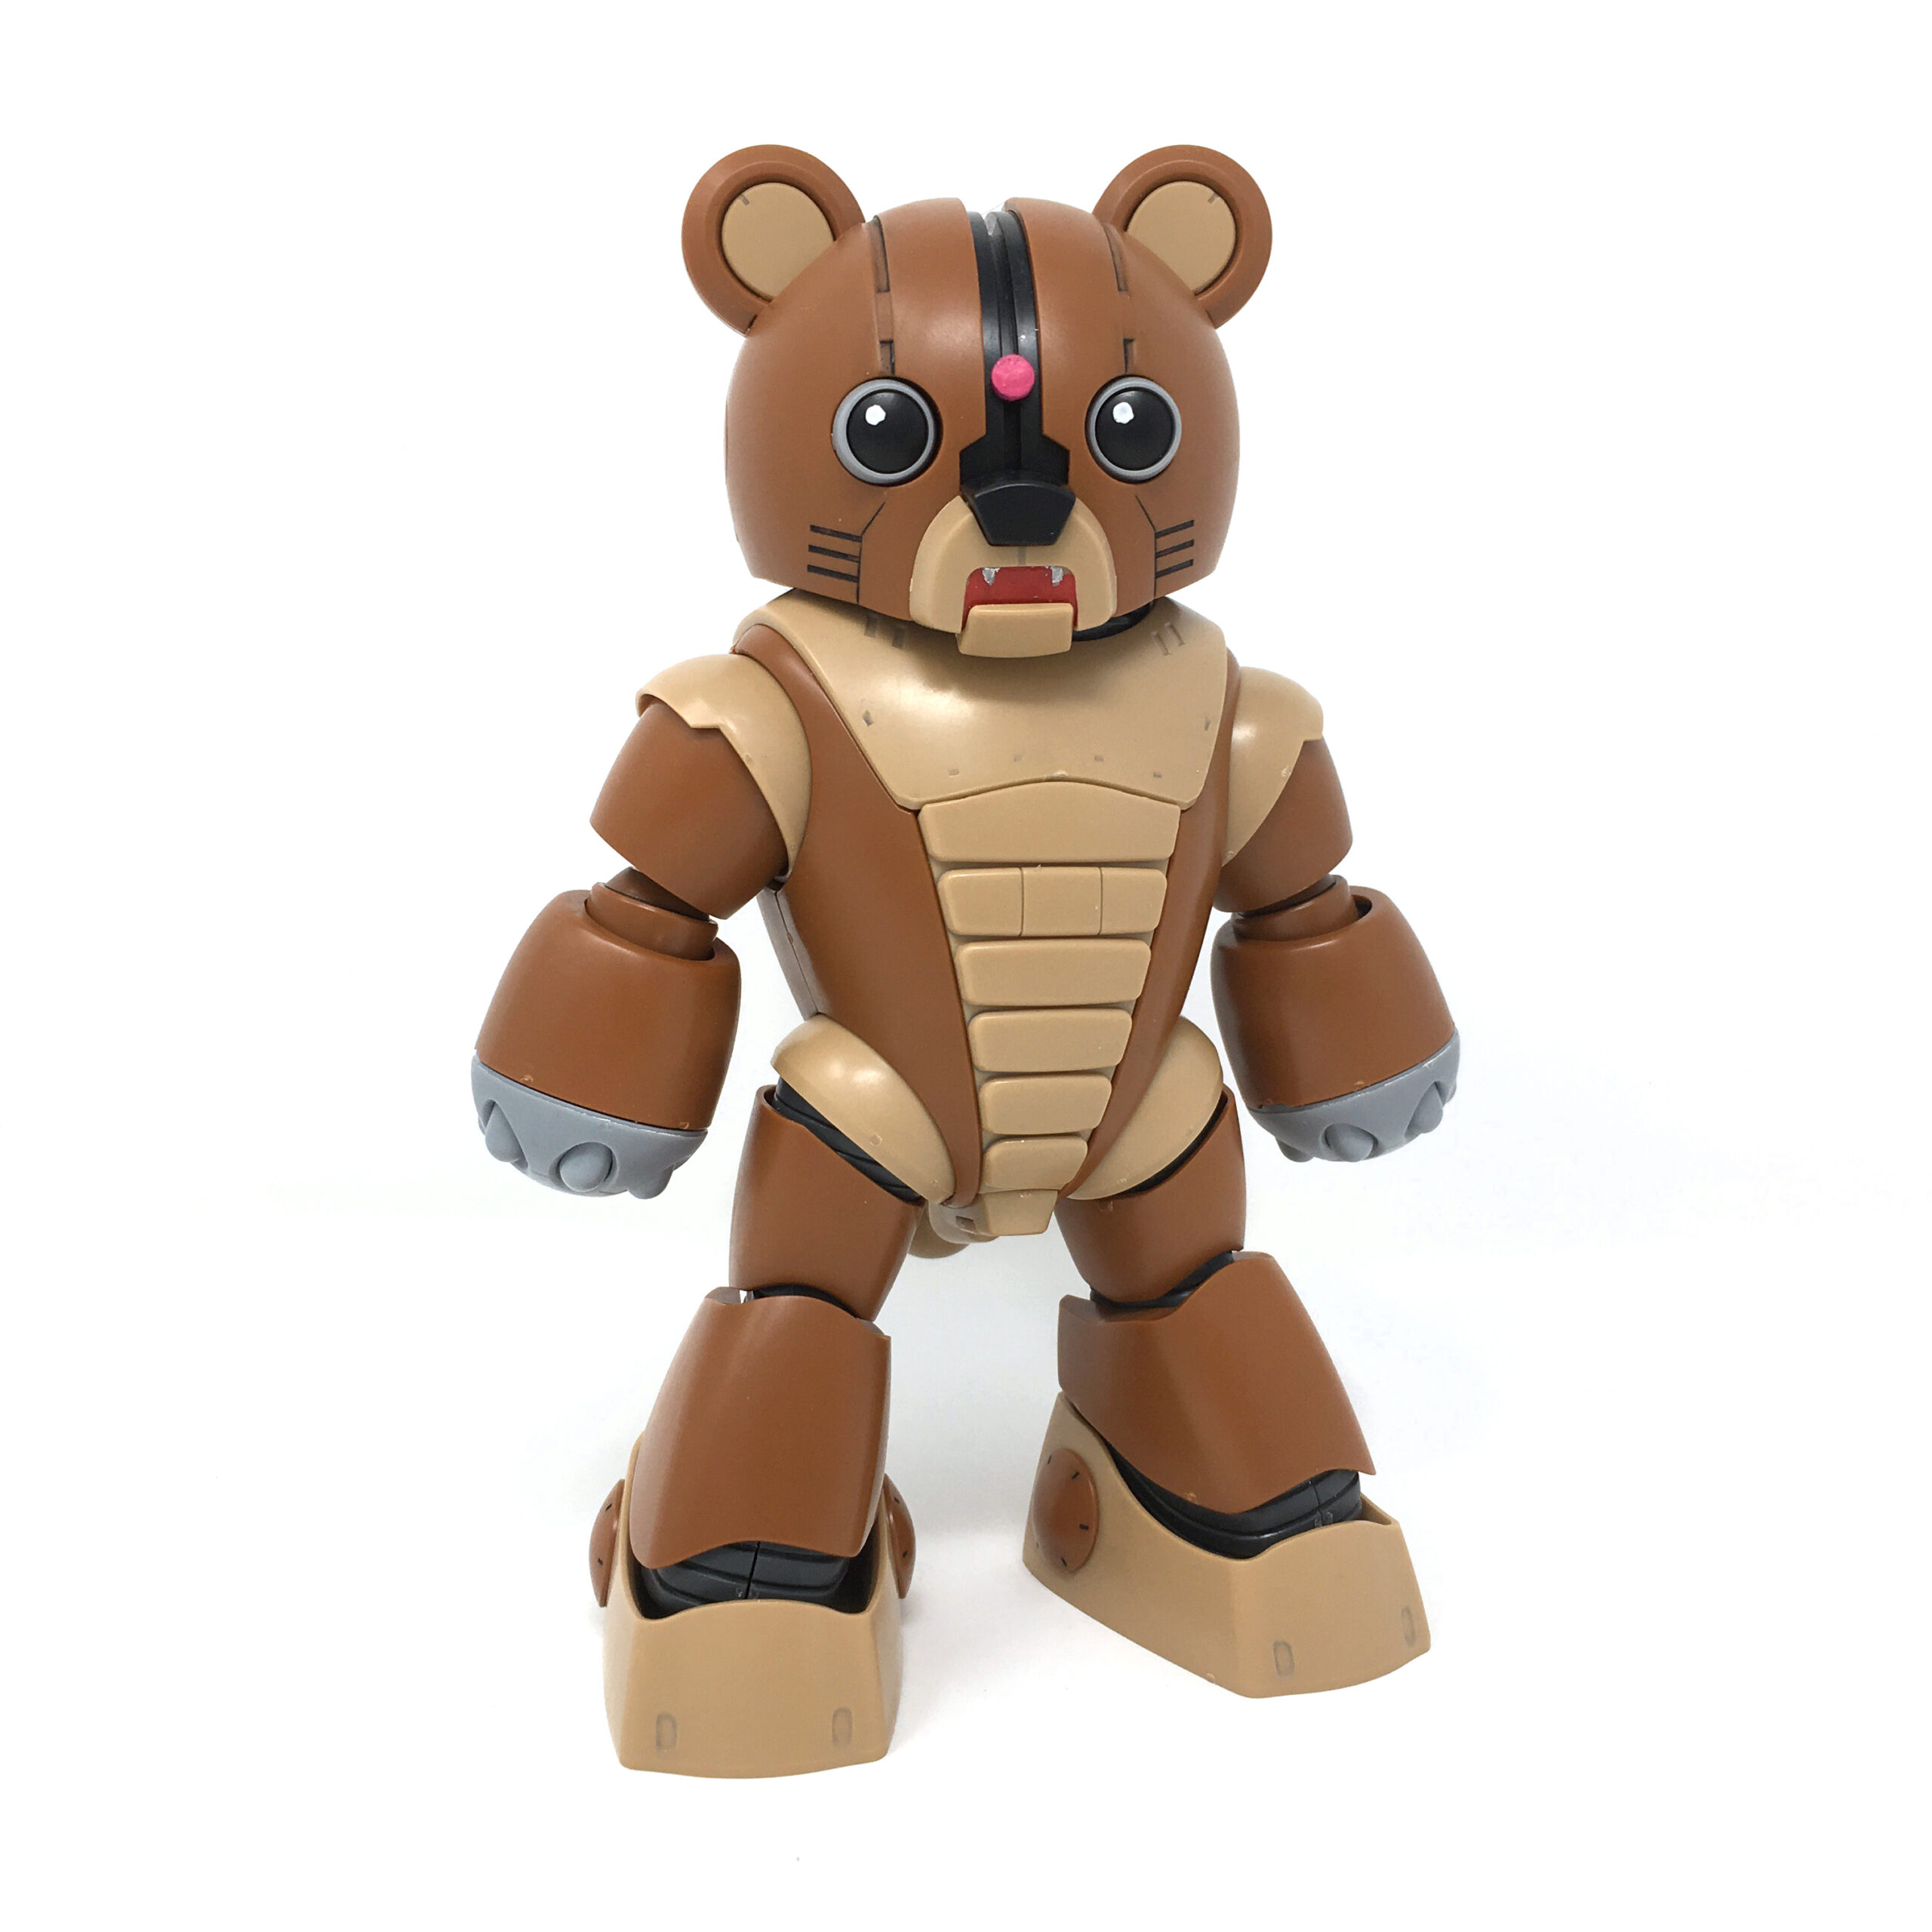 A Beargguy from Mobile Suit Gundam.